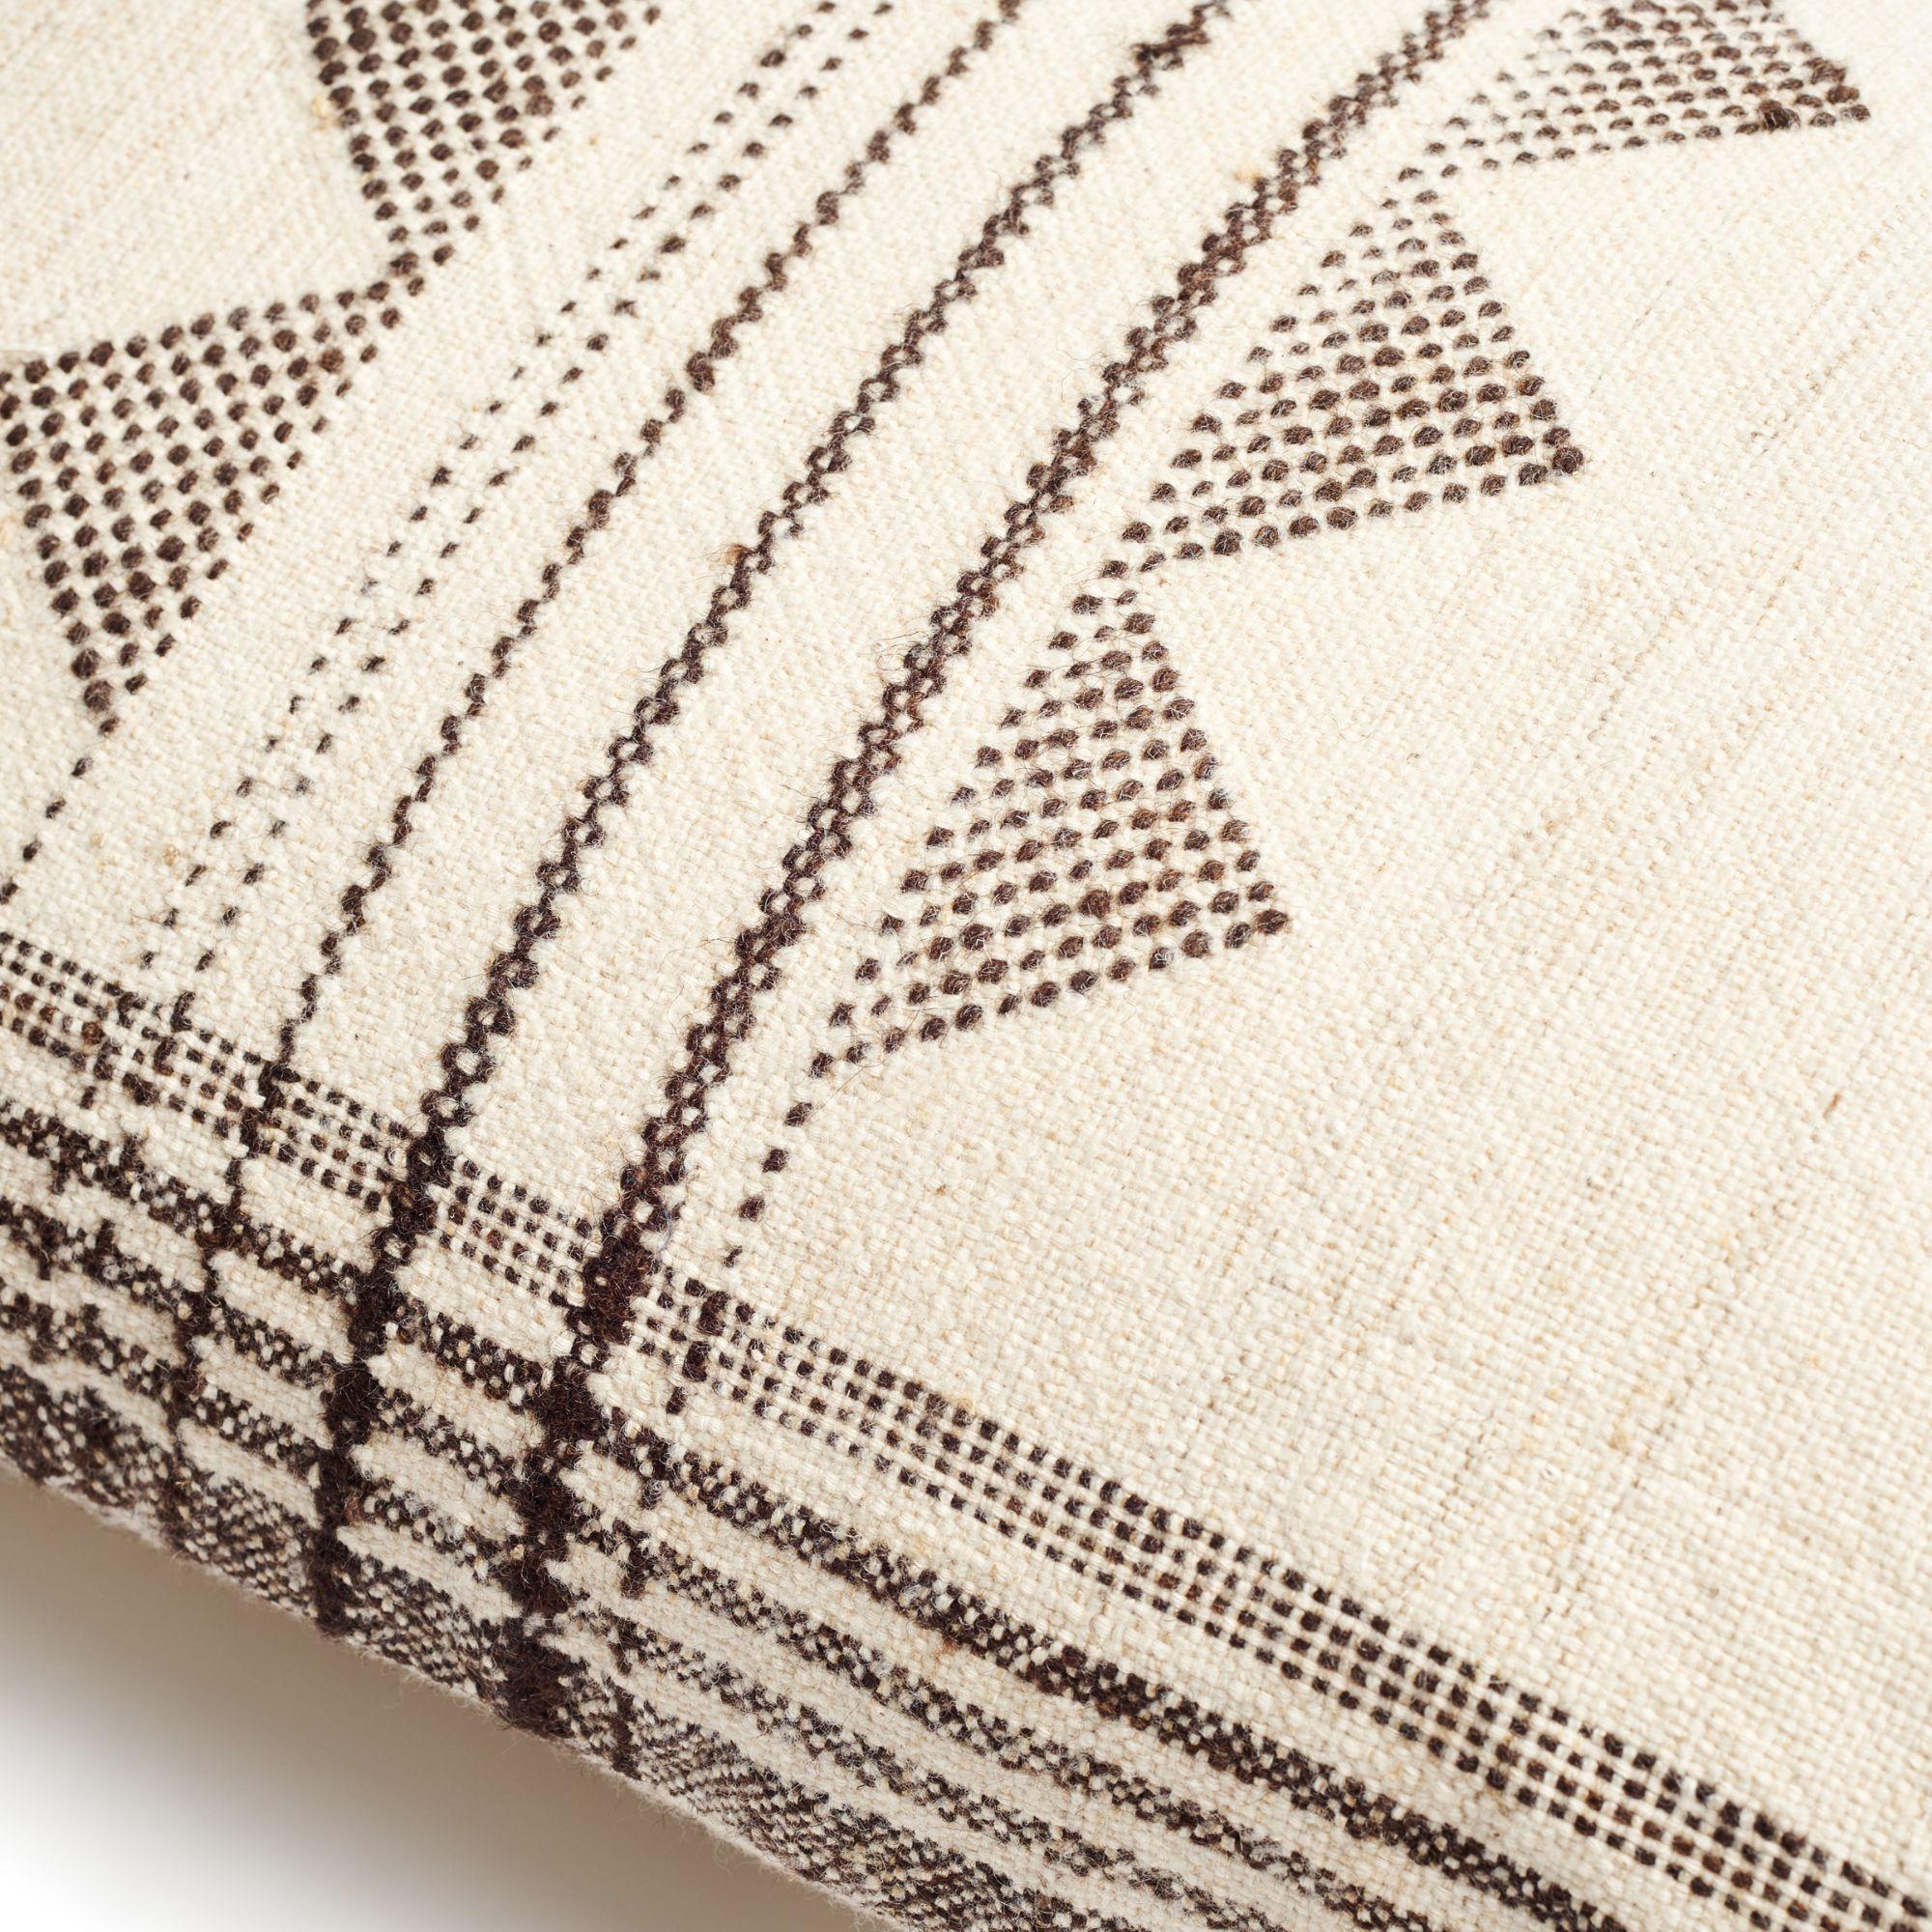 Kora Large Lumbar Pillow is a slightly textured handwoven pillow where our artisans have skillfully blended hand spun yarns like silk, wool and organic cotton. The beauty of this pillow is in its pure design that stands out with the use of undyed